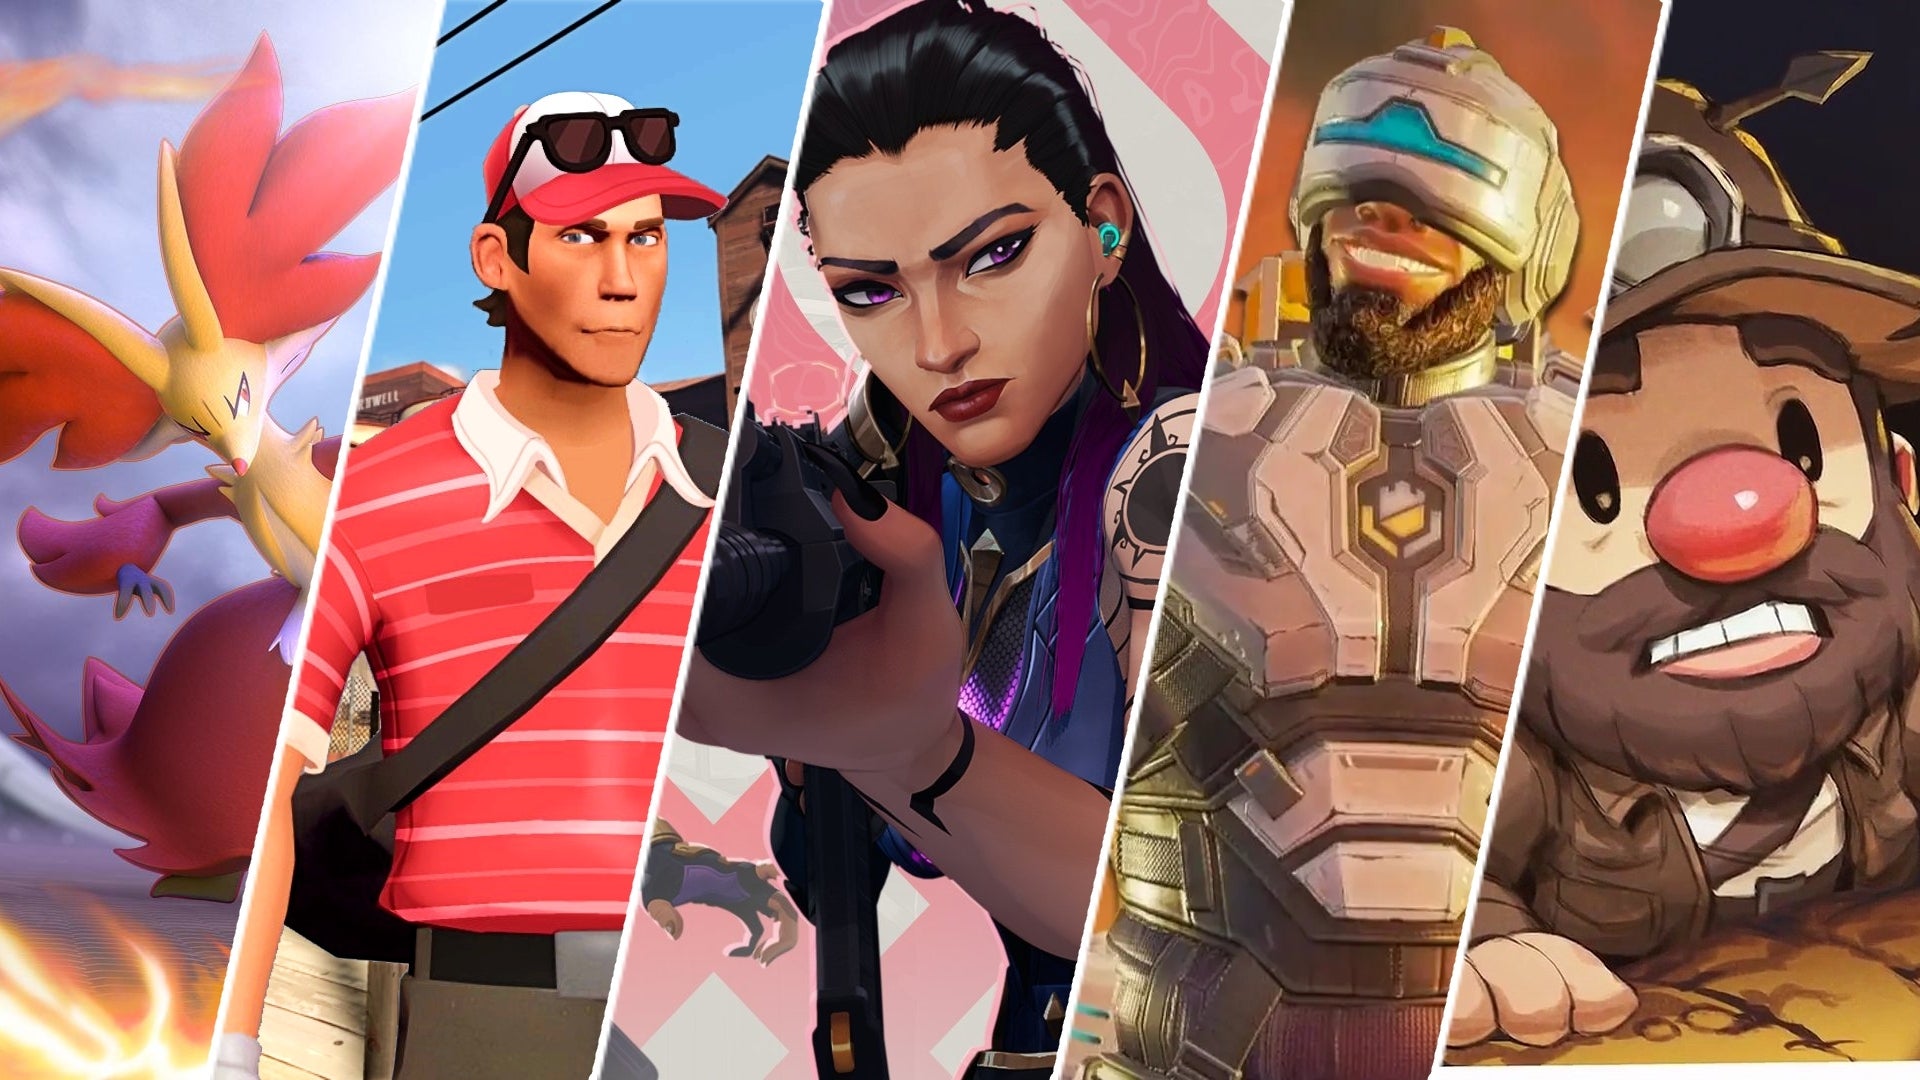 Free Games | Download A Free PC Game Every Week - Epic Games Store